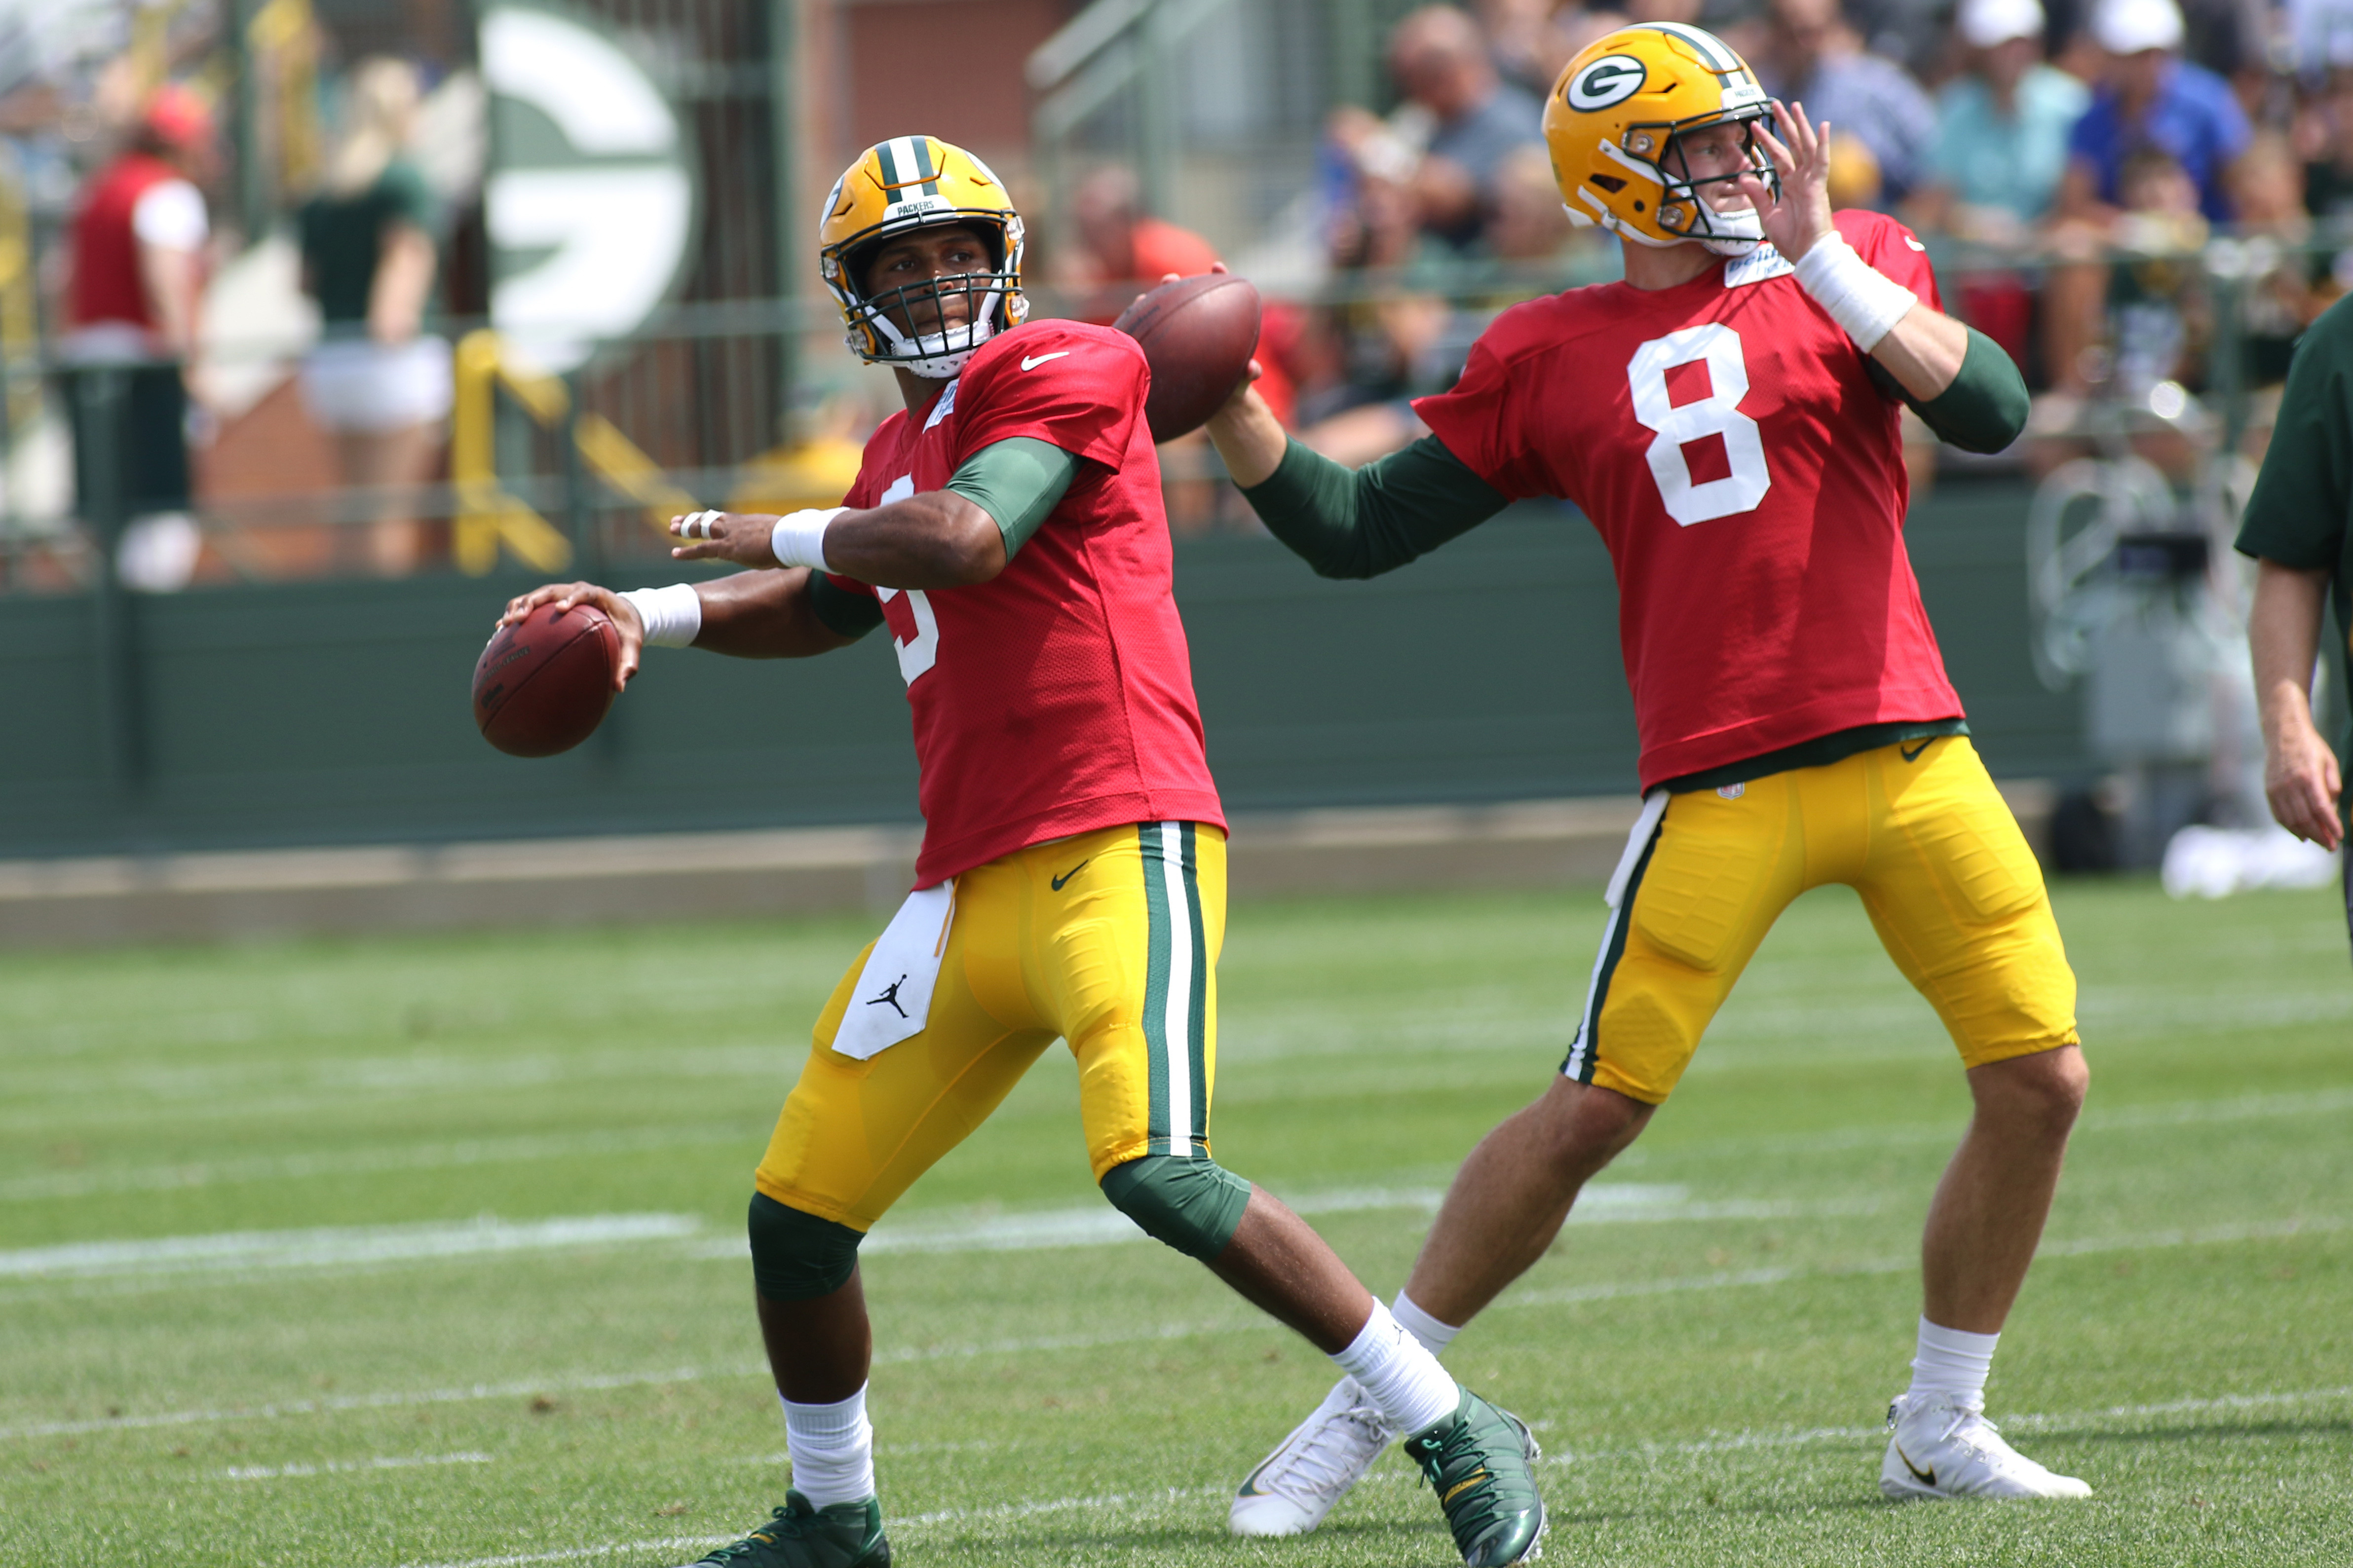 NFL: JUL 31 Packers Training Camp